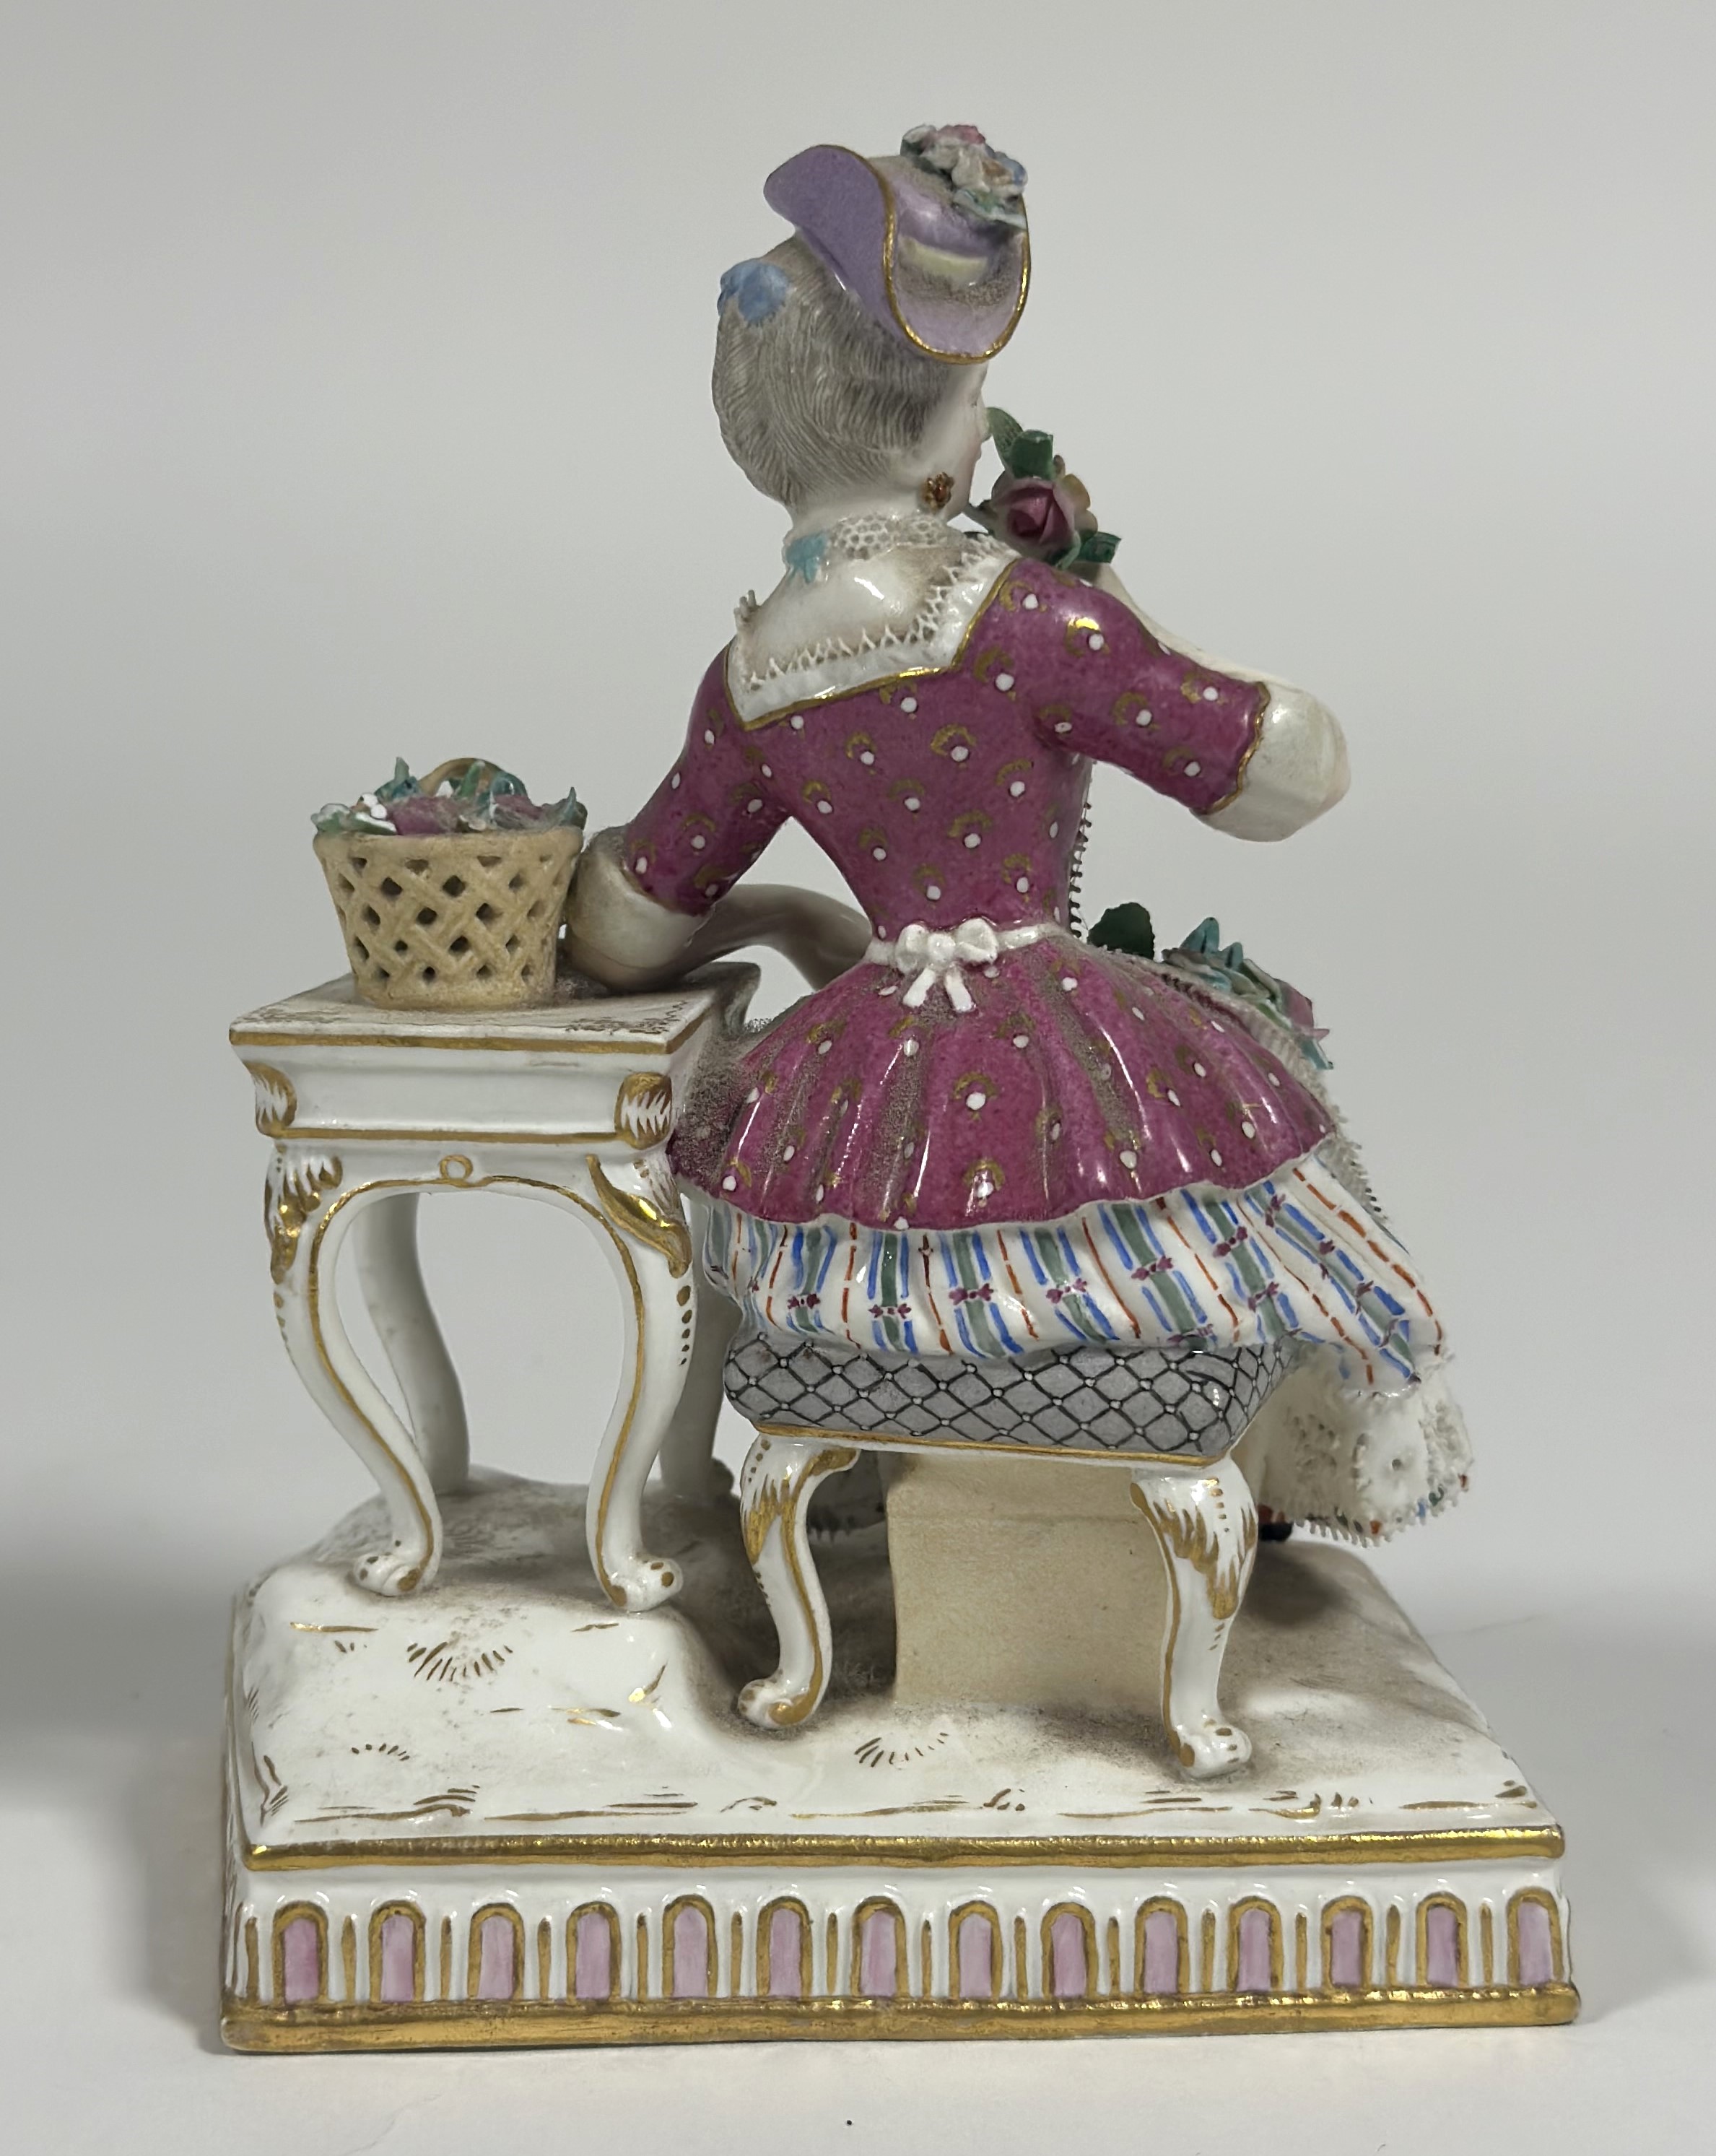 Property of the late Countess Haig: a 19th century Meissen porcelain figure, from a set of the - Image 3 of 4